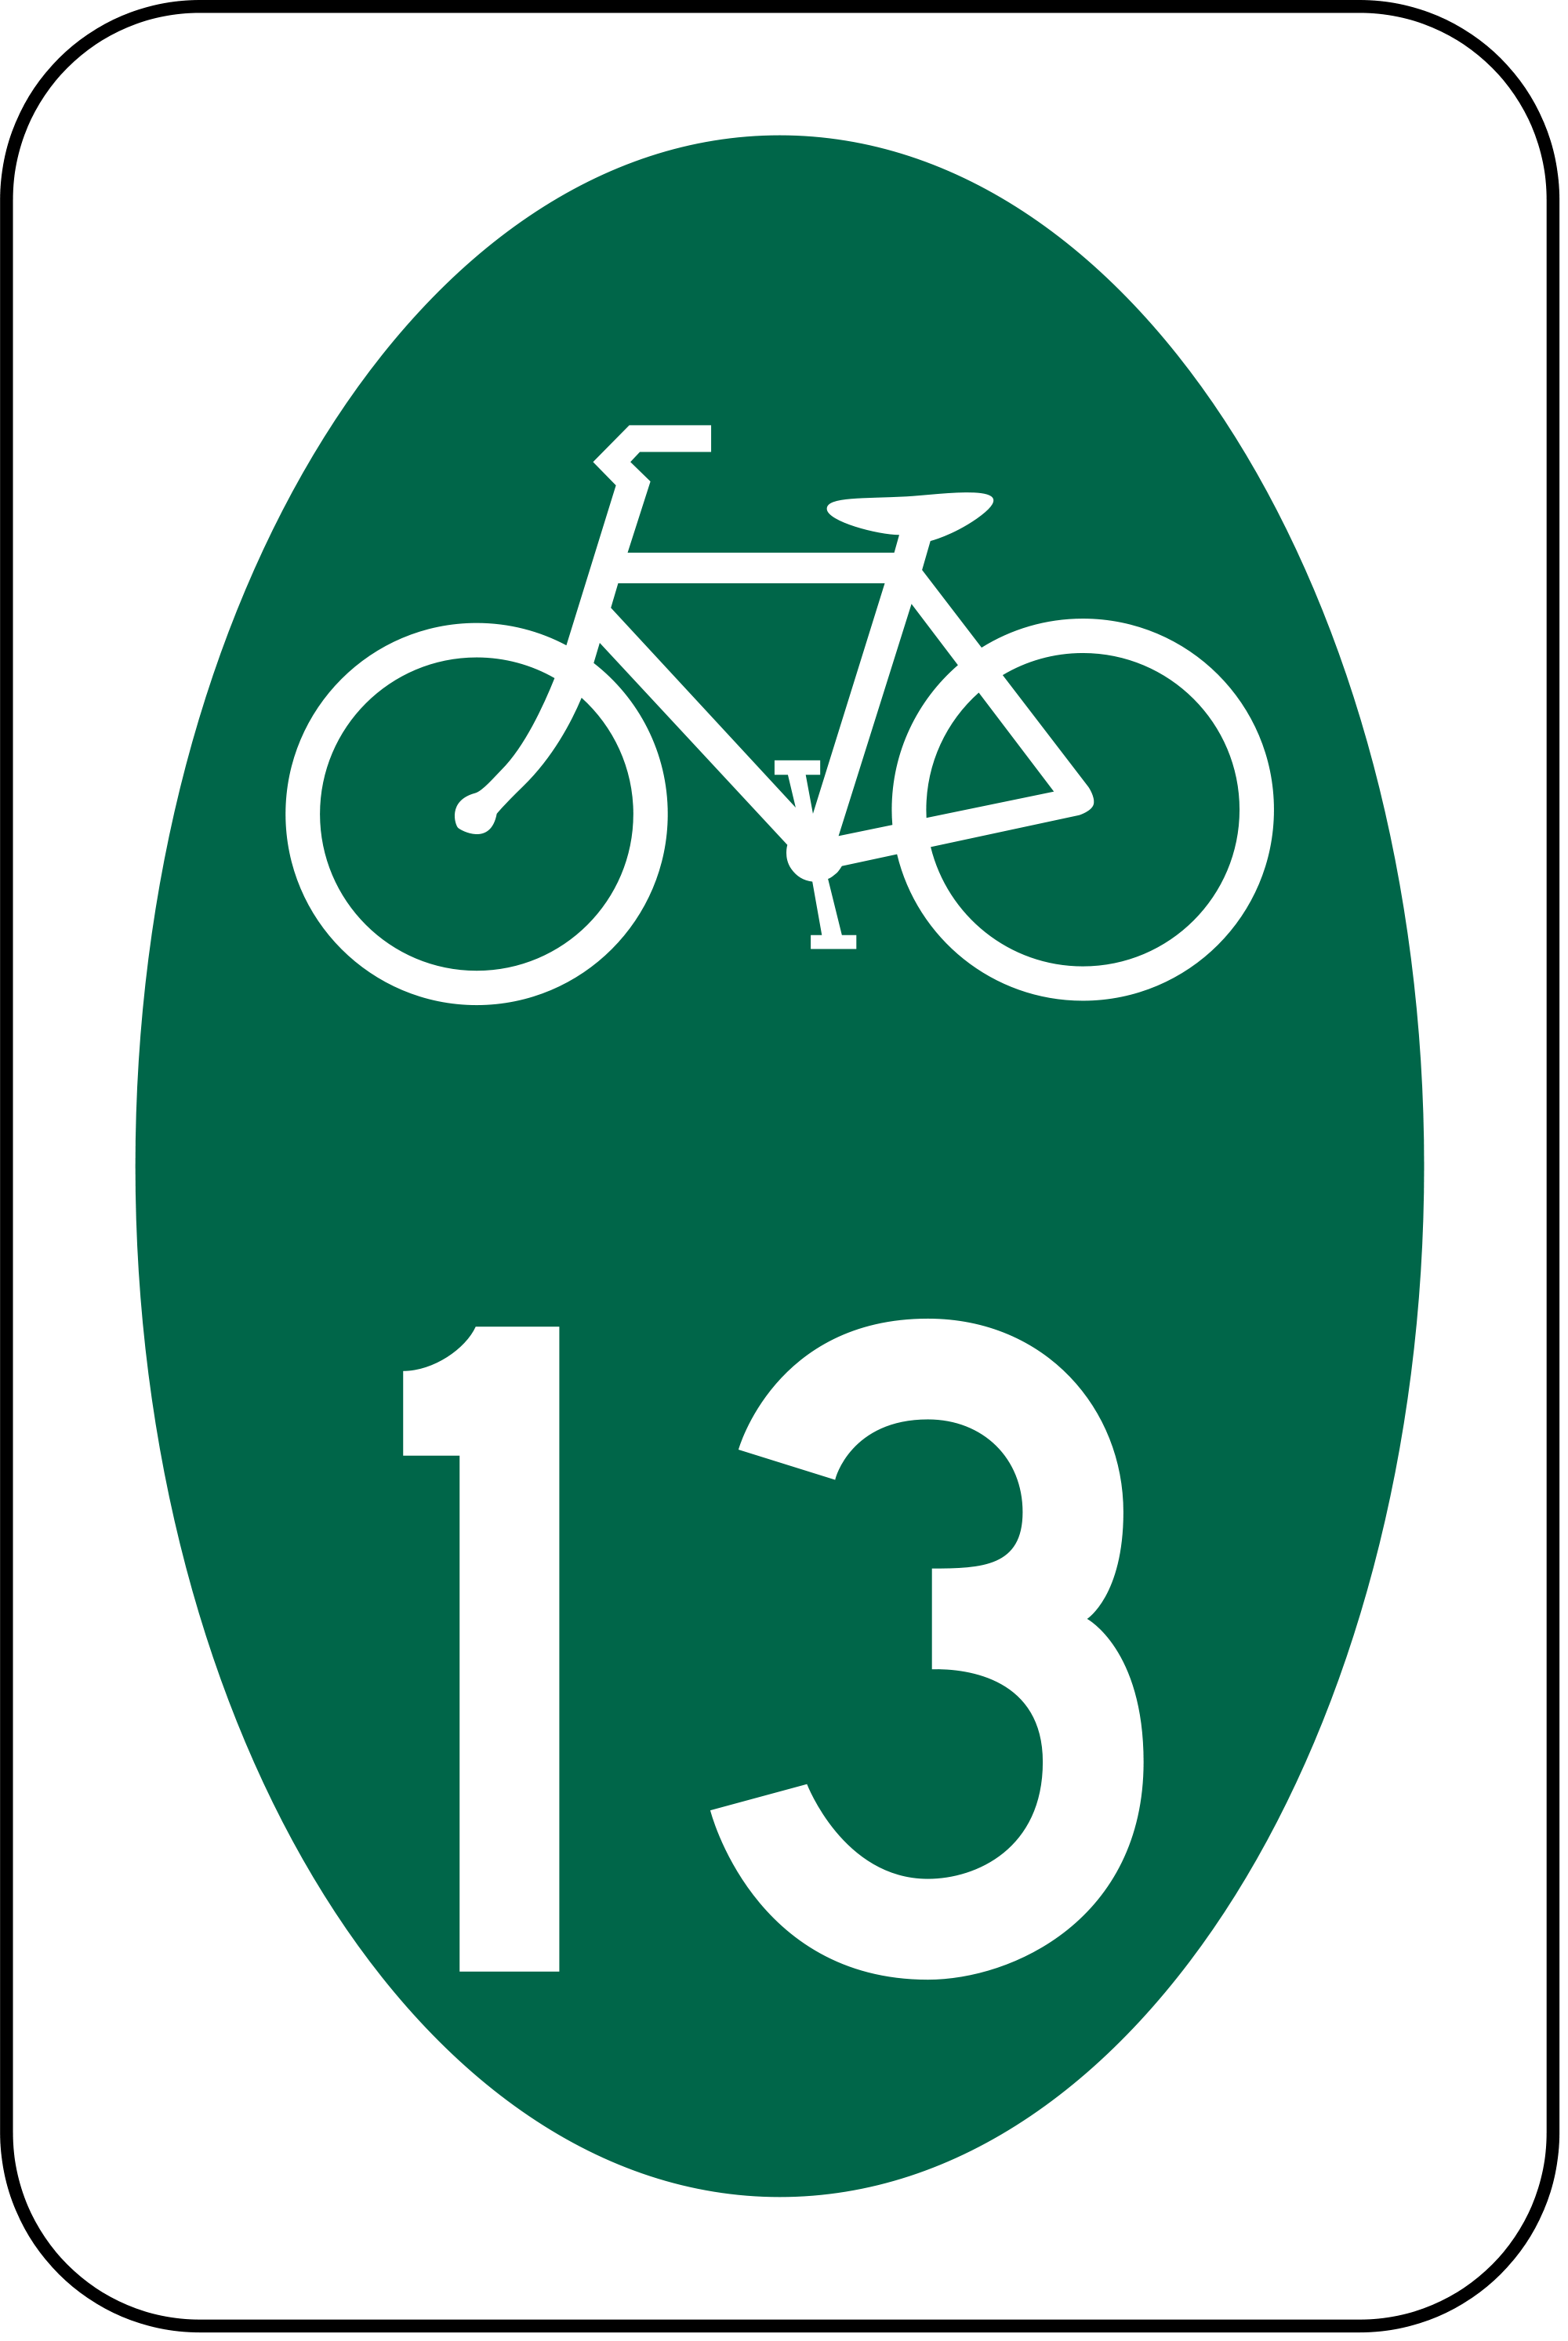 M1-8 Bicycle Route Guide Sign